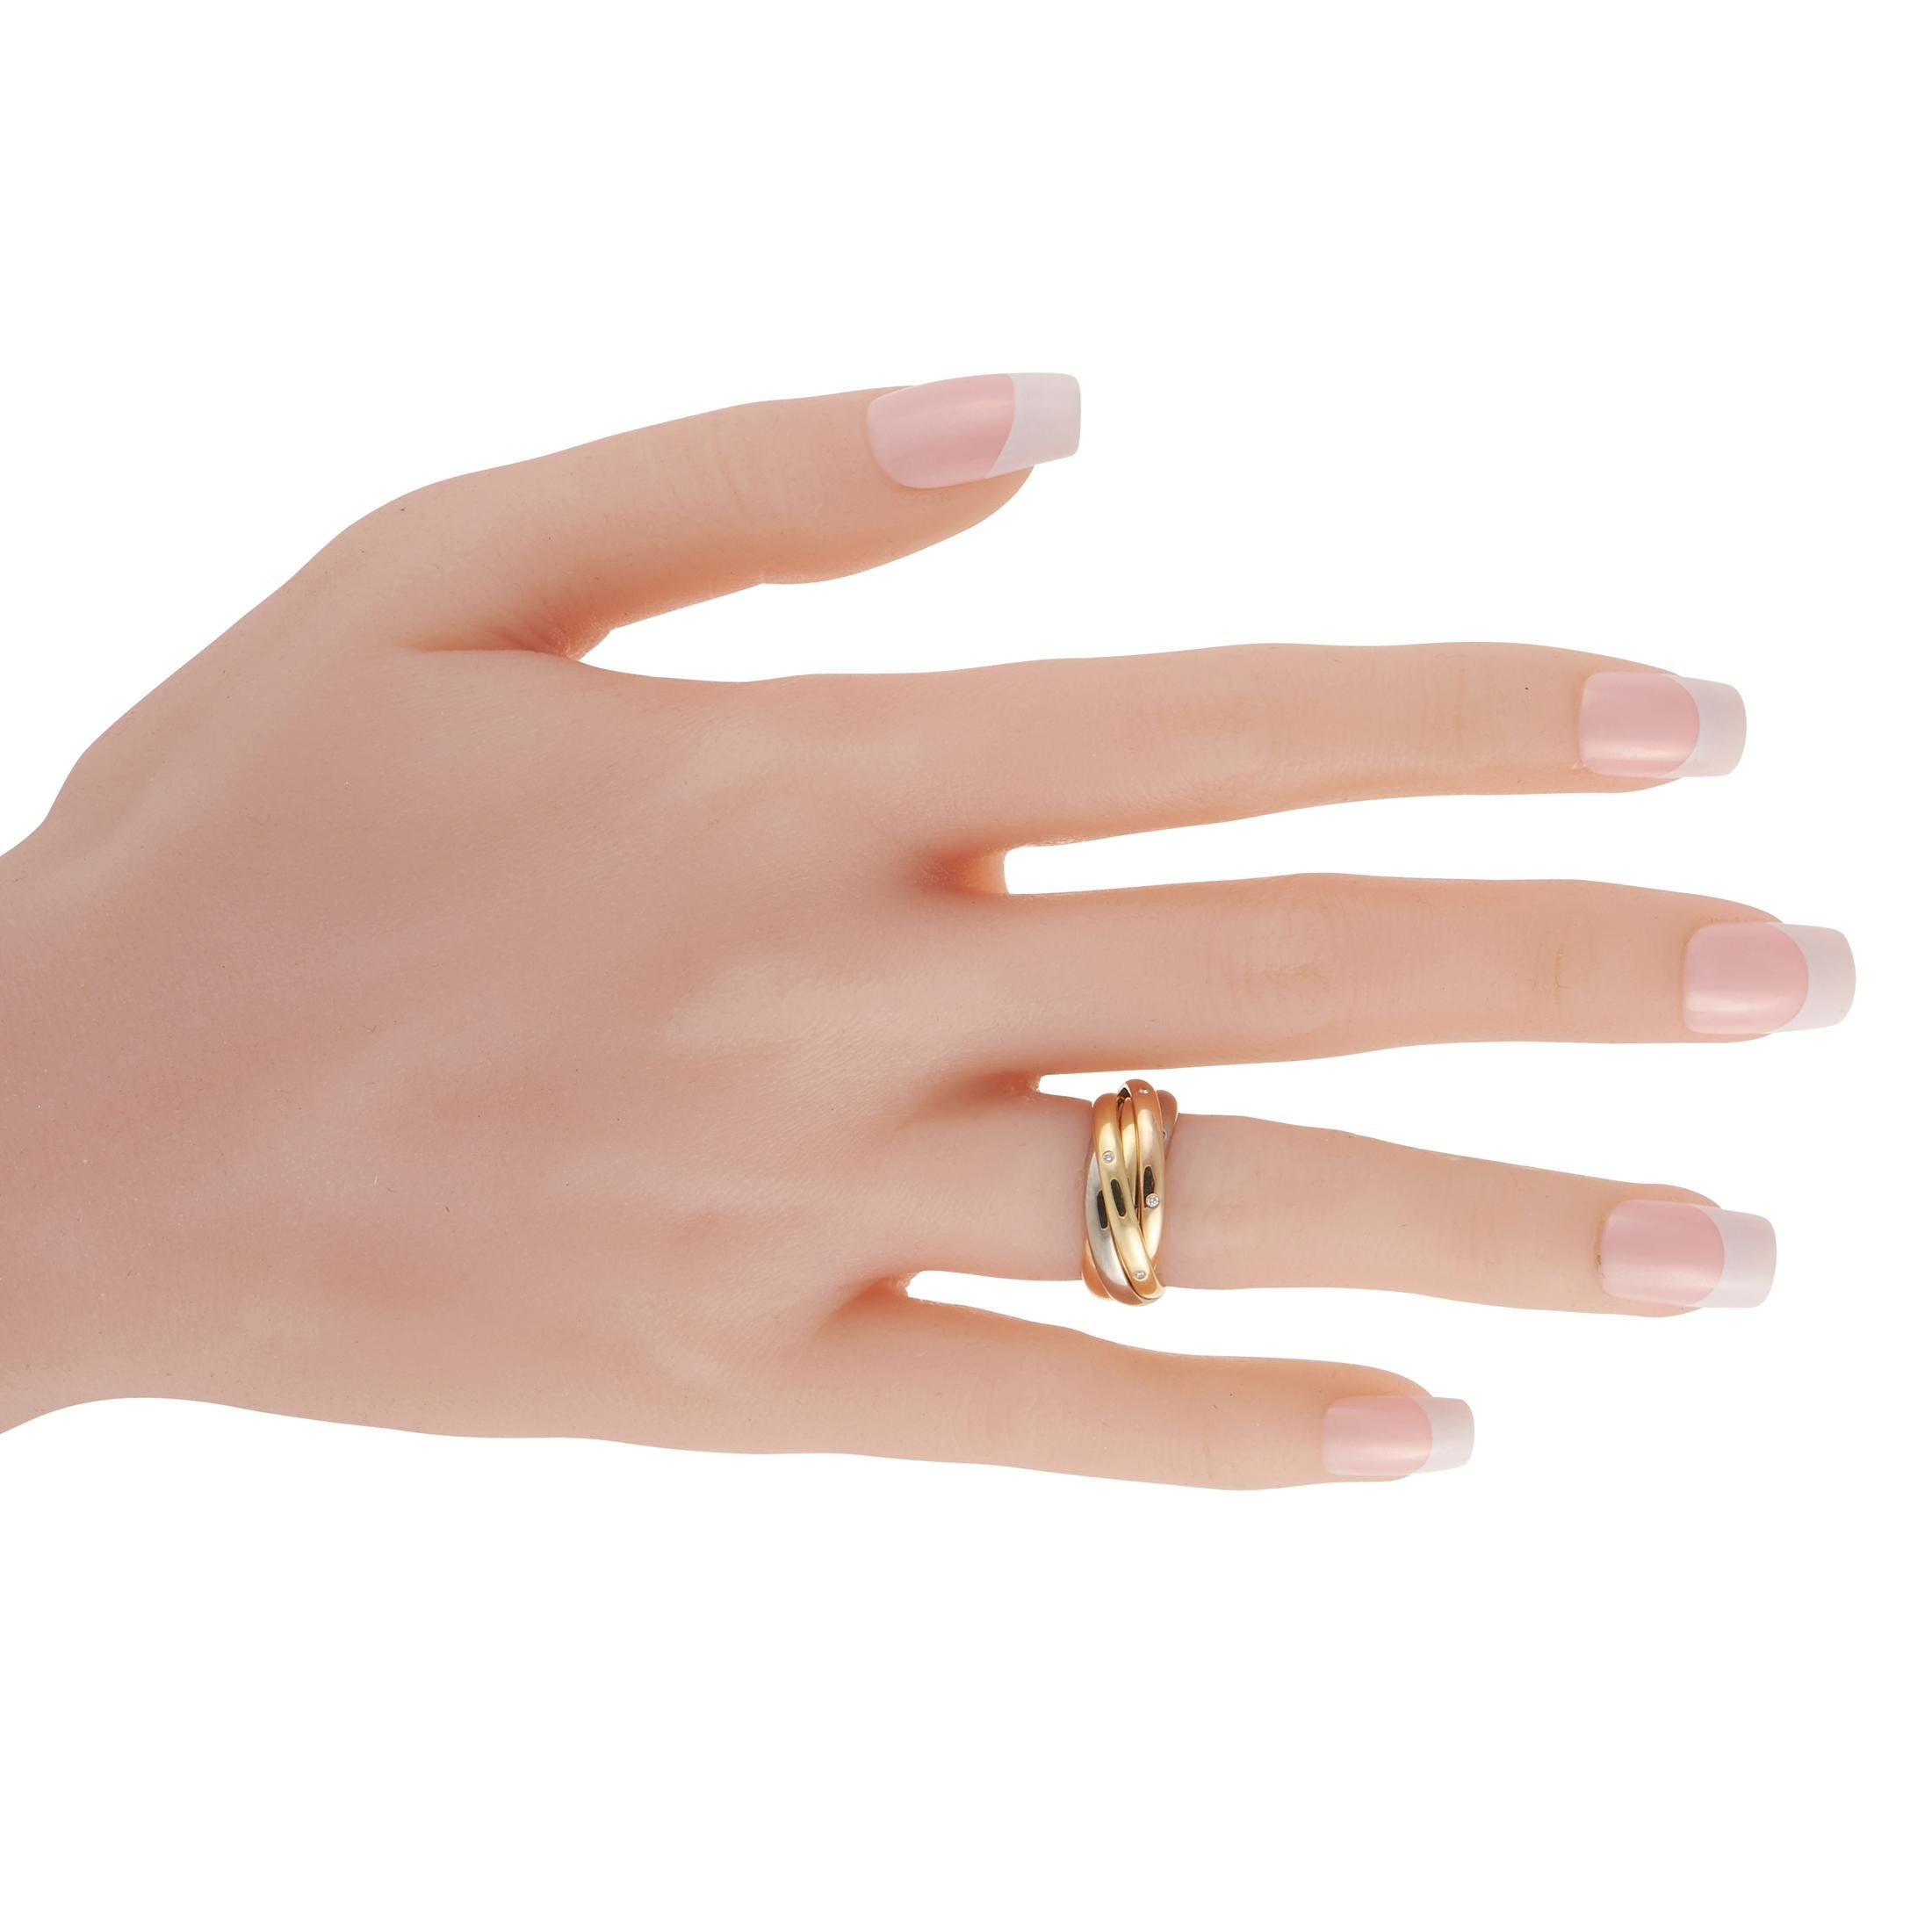 Round Cut Cartier Trinity 18K Yellow, White and Rose Gold Diamond Ring